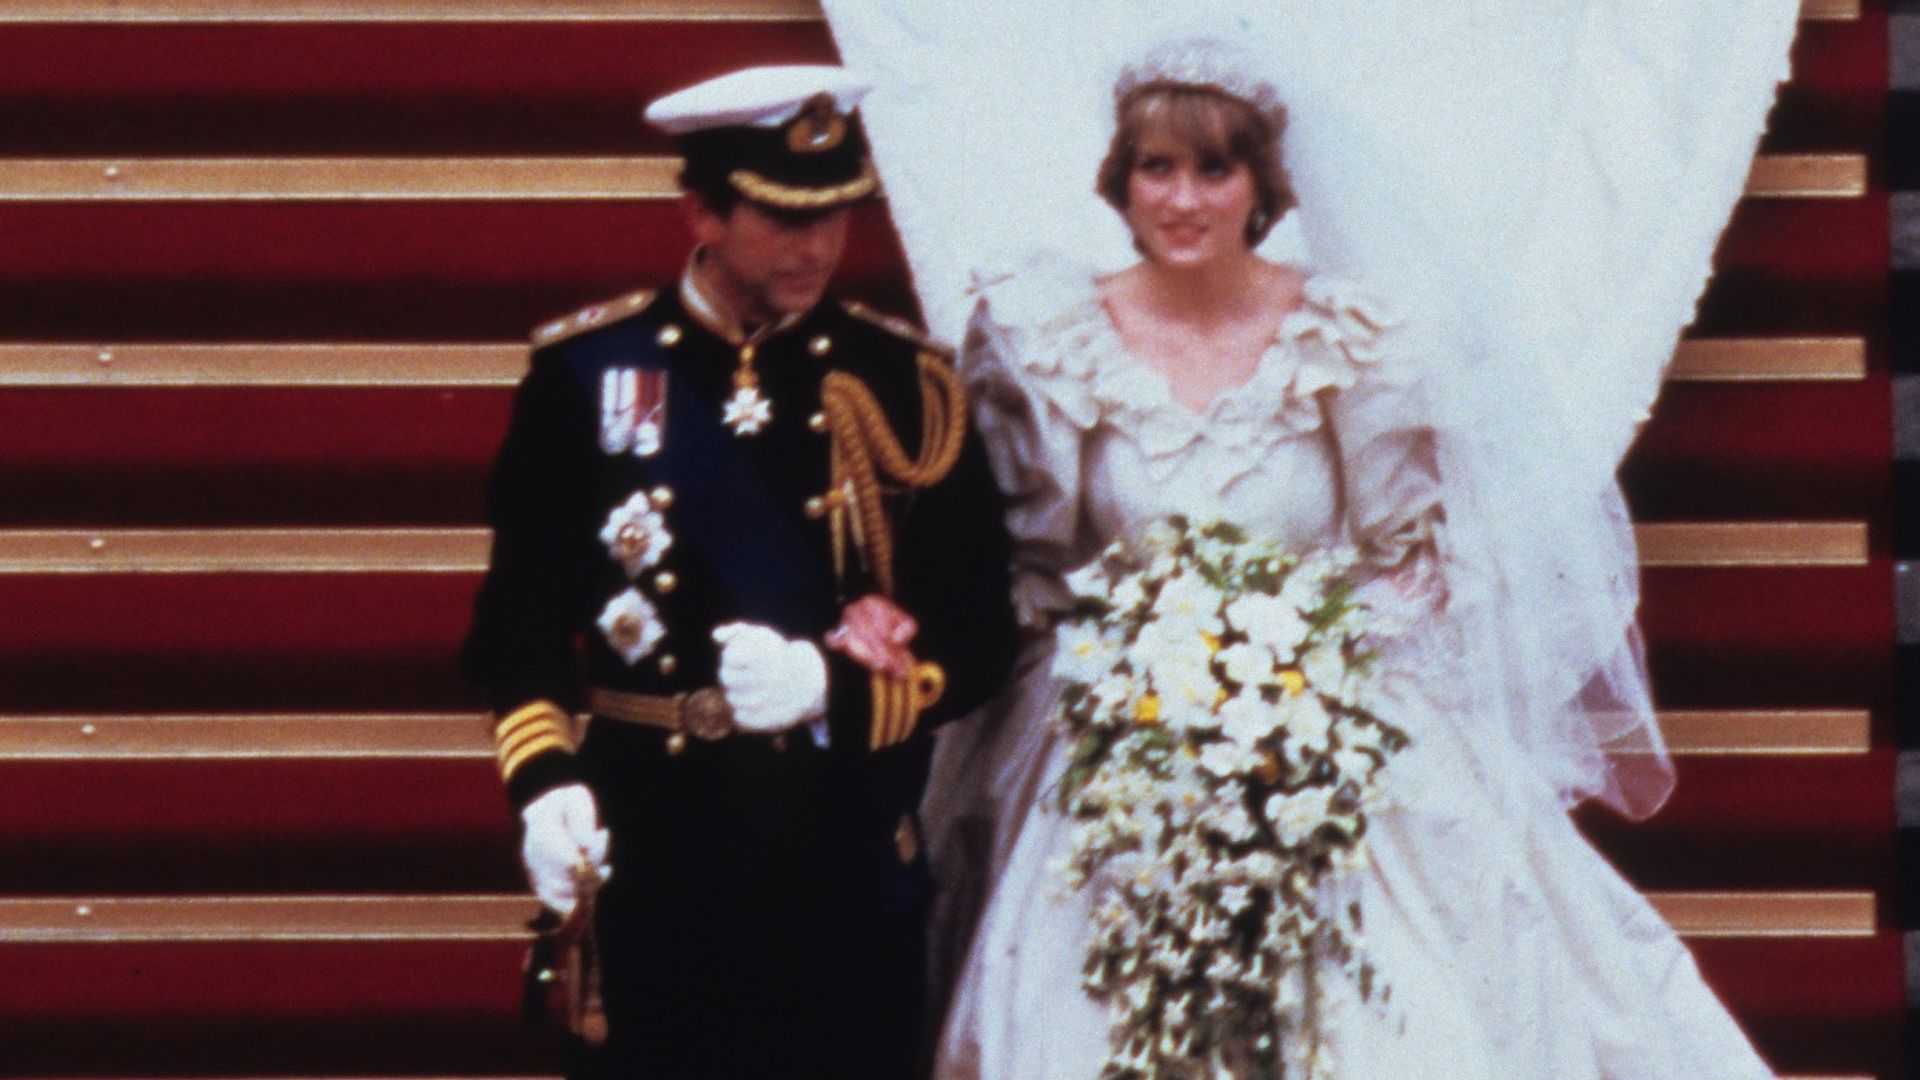 Prince Charles and Princess Diana walking down the stairs at St. Paul's Cathedral following their wedding on July 29, 1981 